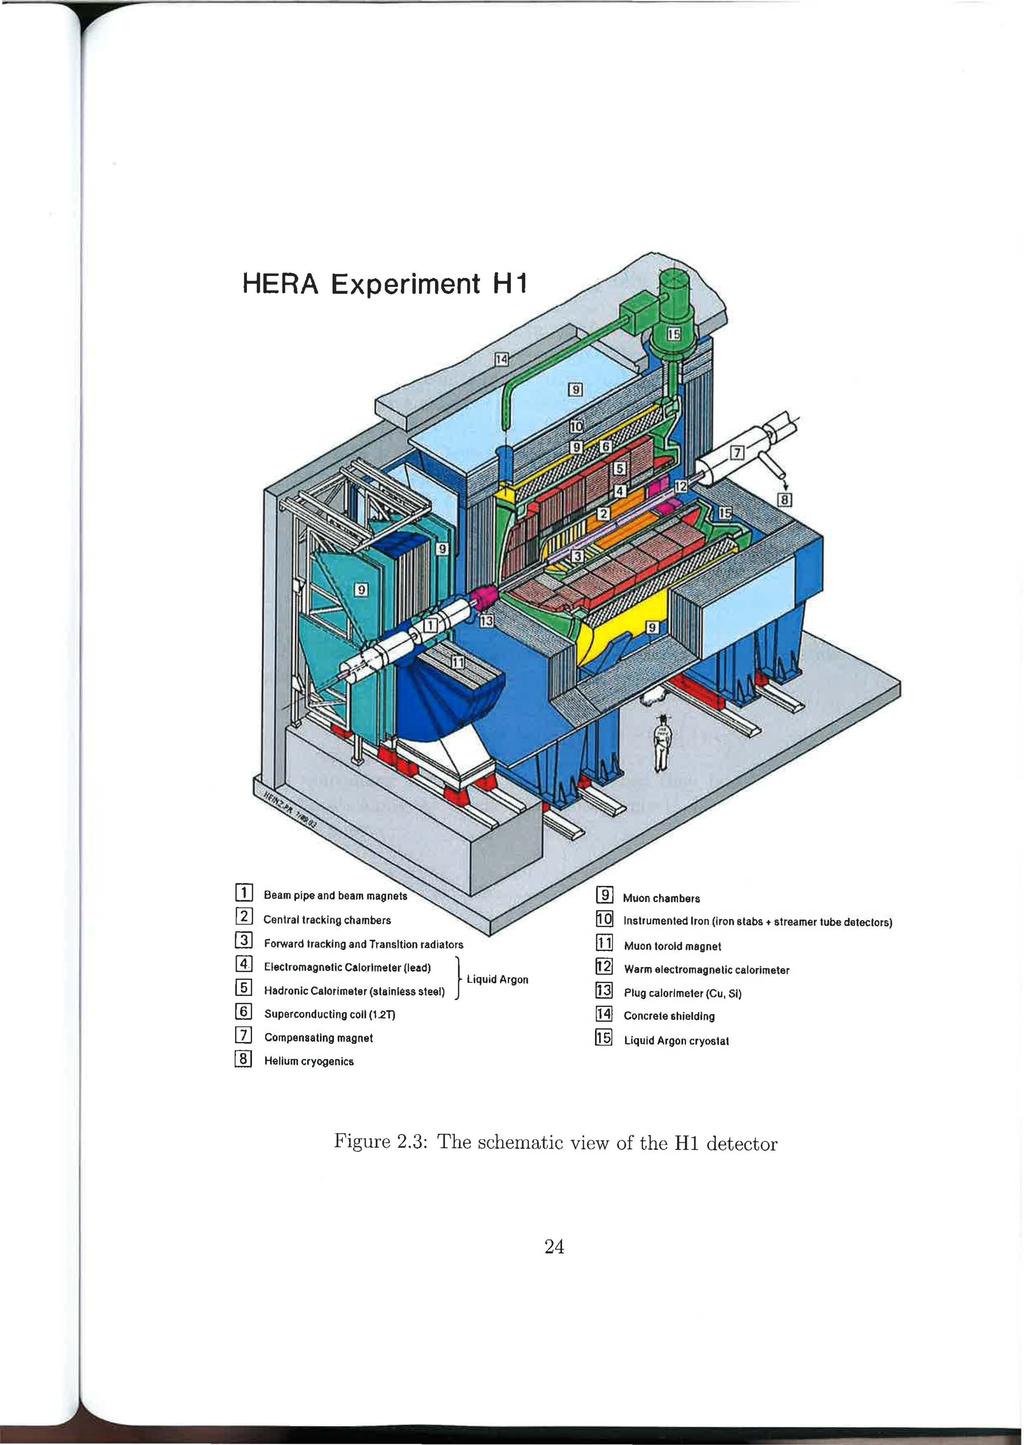 HERA Experiment H 1 Muon chambers Central tracking chambers Forward tracking and Transltion radiators Eleclromagnetlc Calorlmeler (lead) } Hadronlc Calorlmeter (slainless steel) Superconducling coll